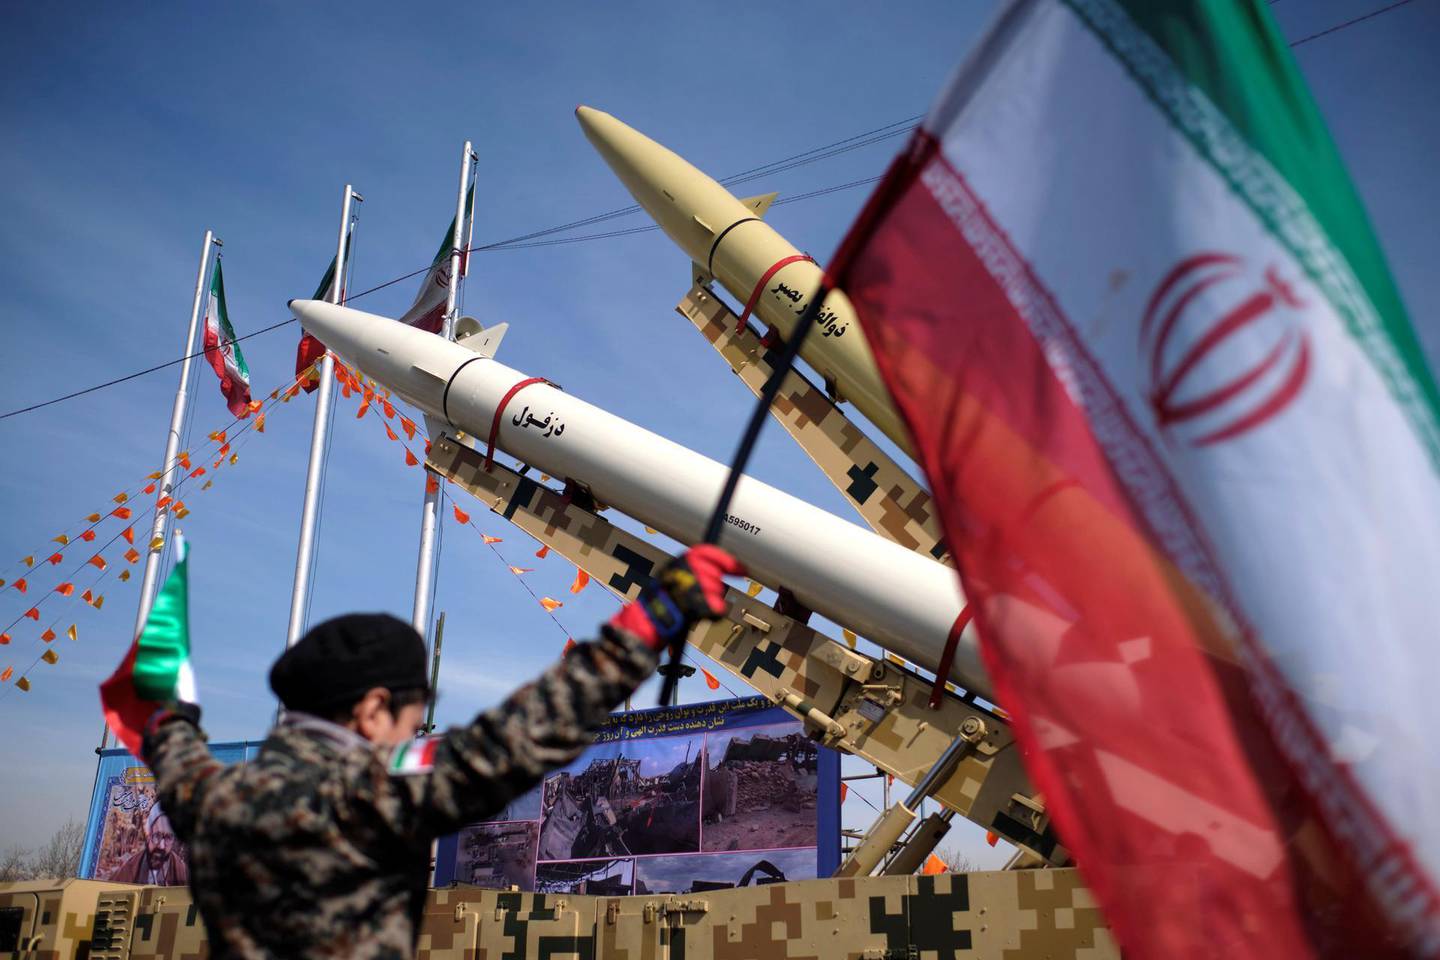 An Iranian young boy wearing an Islamic Revolutionary Guard Corps (IRGC) uniform holds an Iran flag while Iran-made, Dezful medium range ballistic missile (Bottom) and Zolfaghar road-mobile single-stage solid-propelled liquid fueled missile are pictured in the Azadi (Freedom) square during a rally to commemorate the 42nd Victory anniversary of the Islamic Revolution, that held with motorcycles amid the new coronavirus disease (COVID-19) outbreak in Iran, in Tehran on February 10, 2021, on February 10, 2021.  (Photo by Morteza Nikoubazl/NurPhoto via Getty Images)